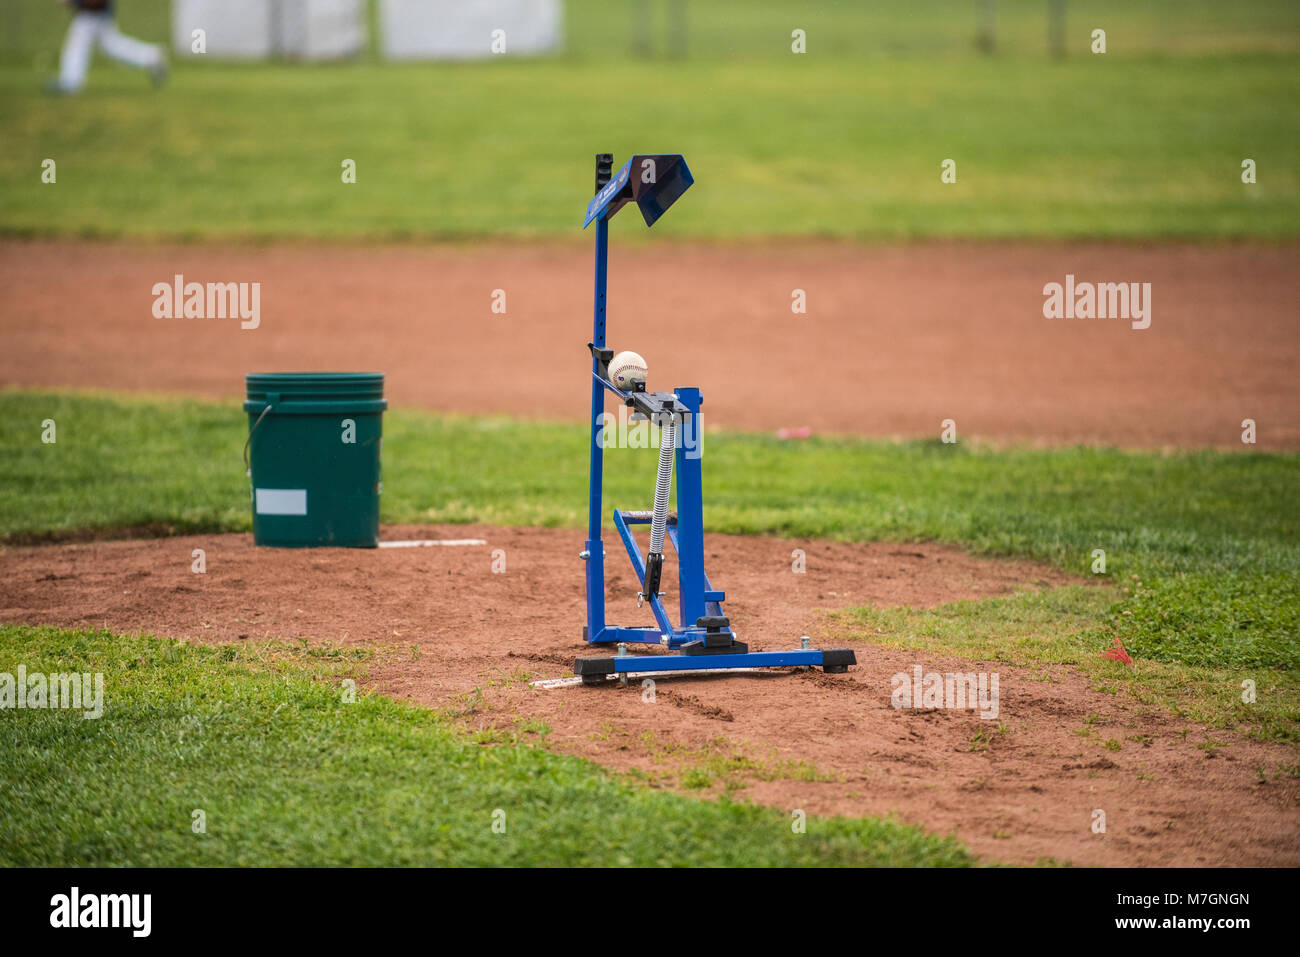 Youth baseball mechanical pitching machine set up on the infield mound to practice batting. Stock Photo